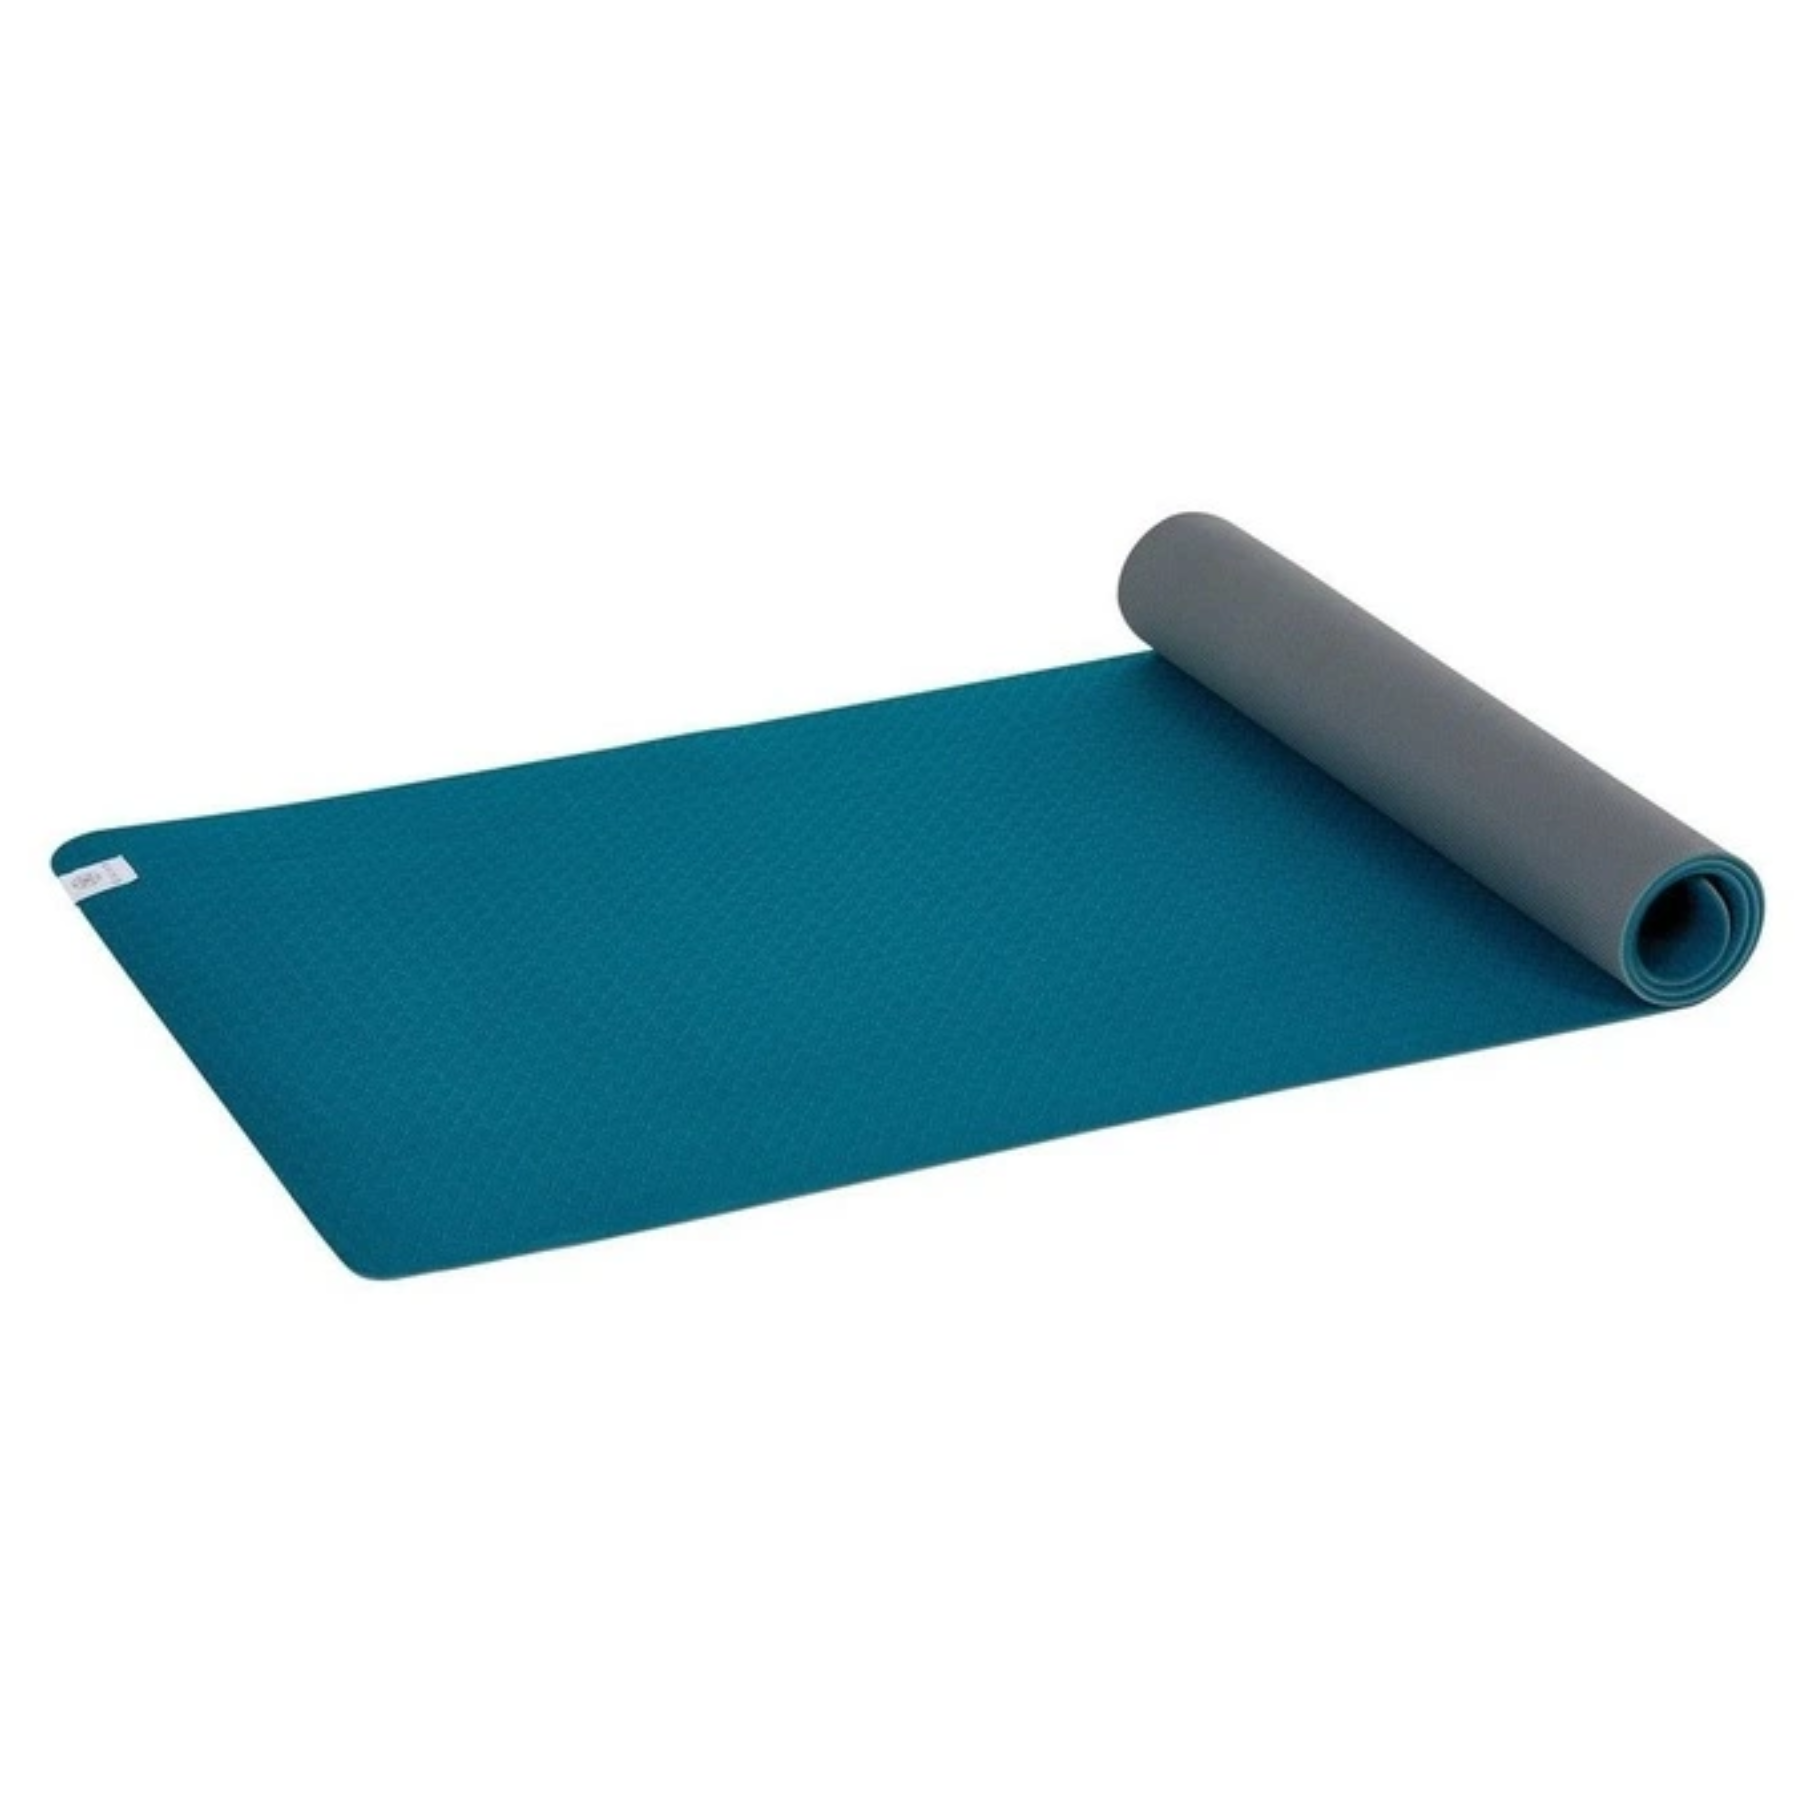 Gaiam Performance Soft Grip Yoga Mat Teal and Charcoal